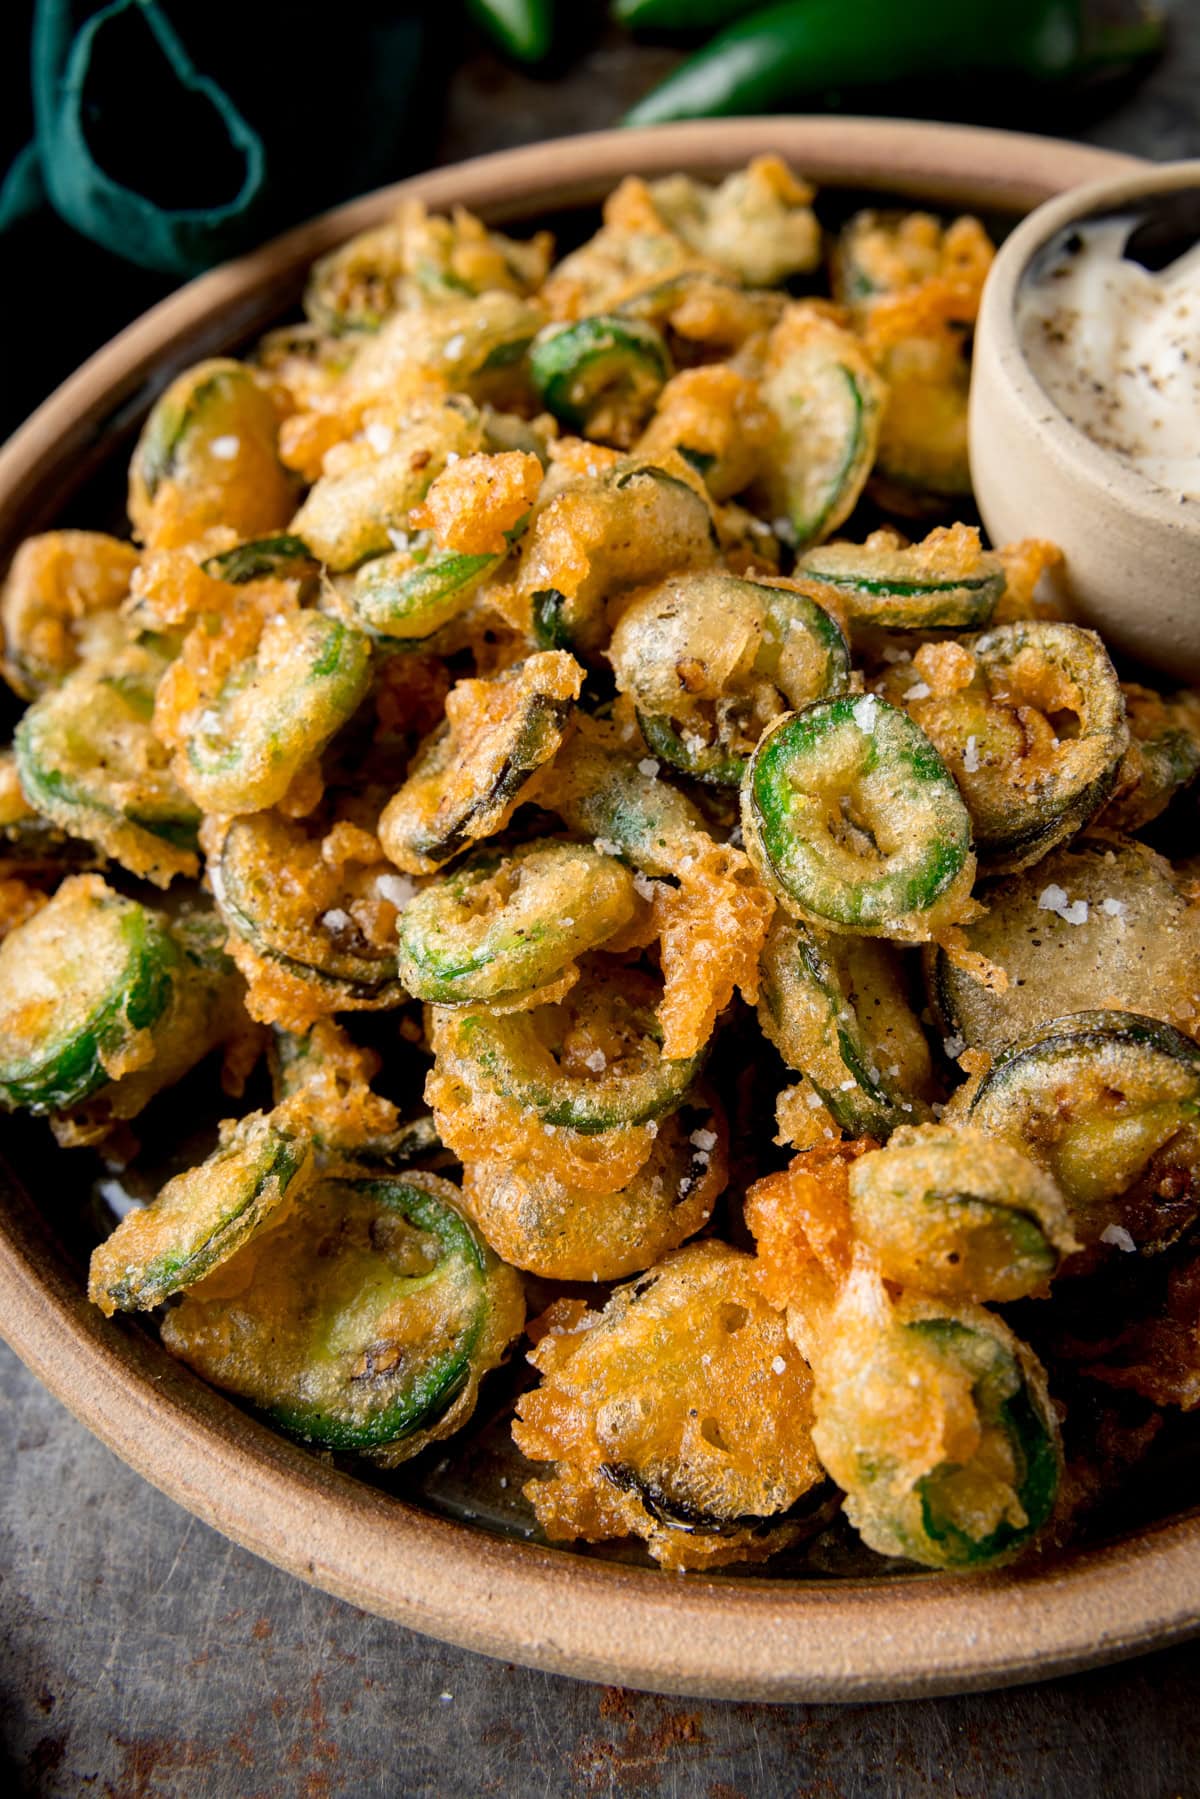 A tall image of a light brown bowl of fried Jalapenos. In the top right of the bowl, there is a light grey dish nestled in the fried Jalapenos, which has garlic mayo in it. In the top left of the background, you can slightly see a dark green napkin. This is all set on a grey surface.